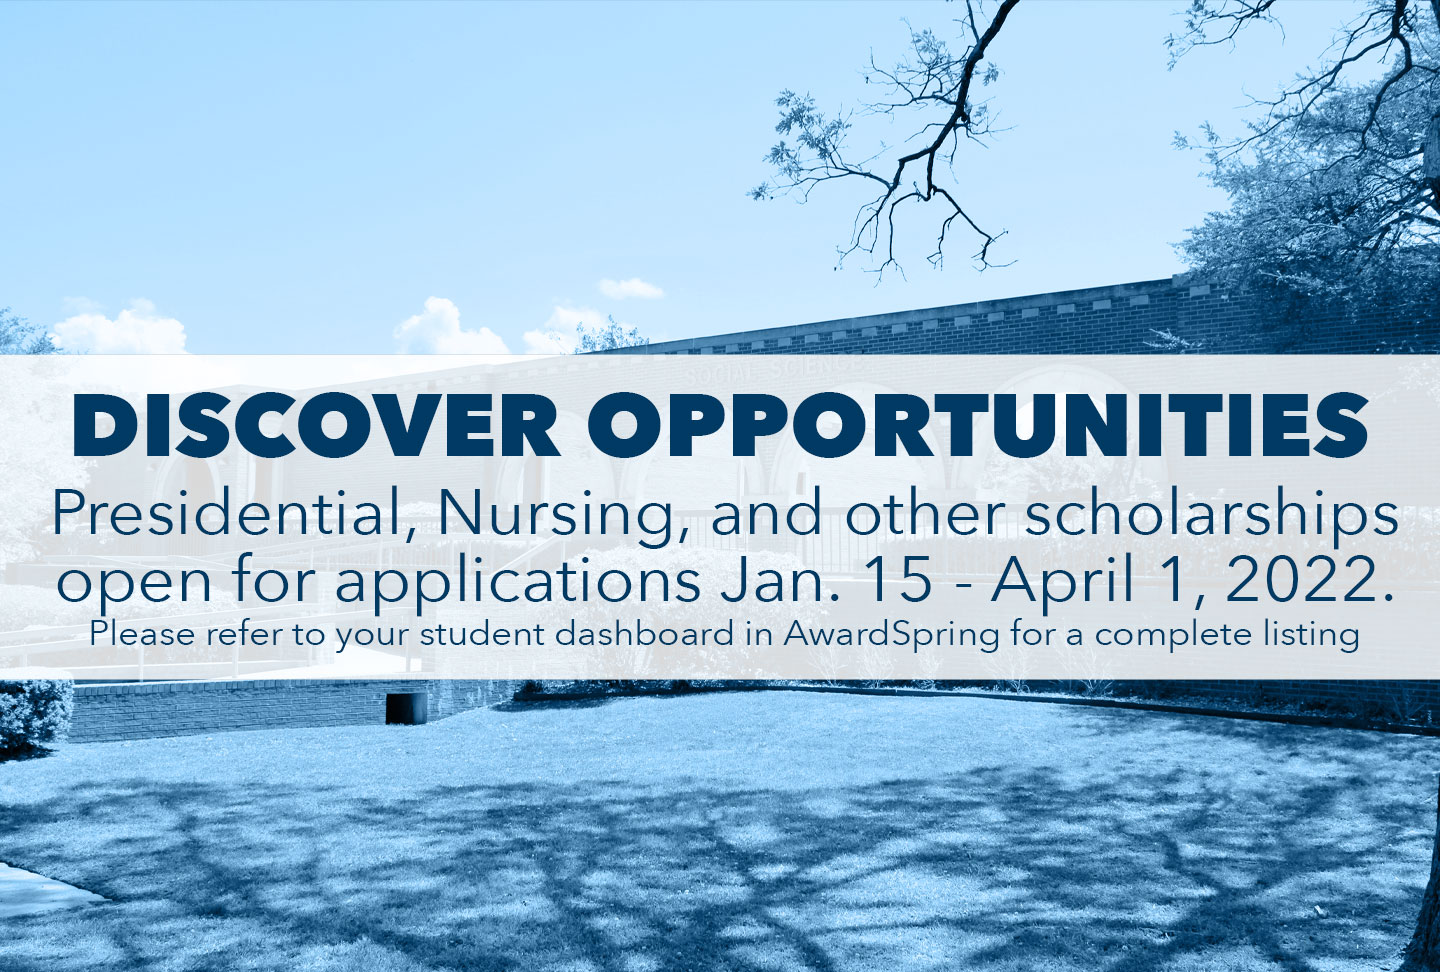 Discover Opportunities- Presidential, Nursing, and other scholarships open for applications January 15 - April 1, 2022. Please refer to your student dashboard in AwardSpring for a complete listing.